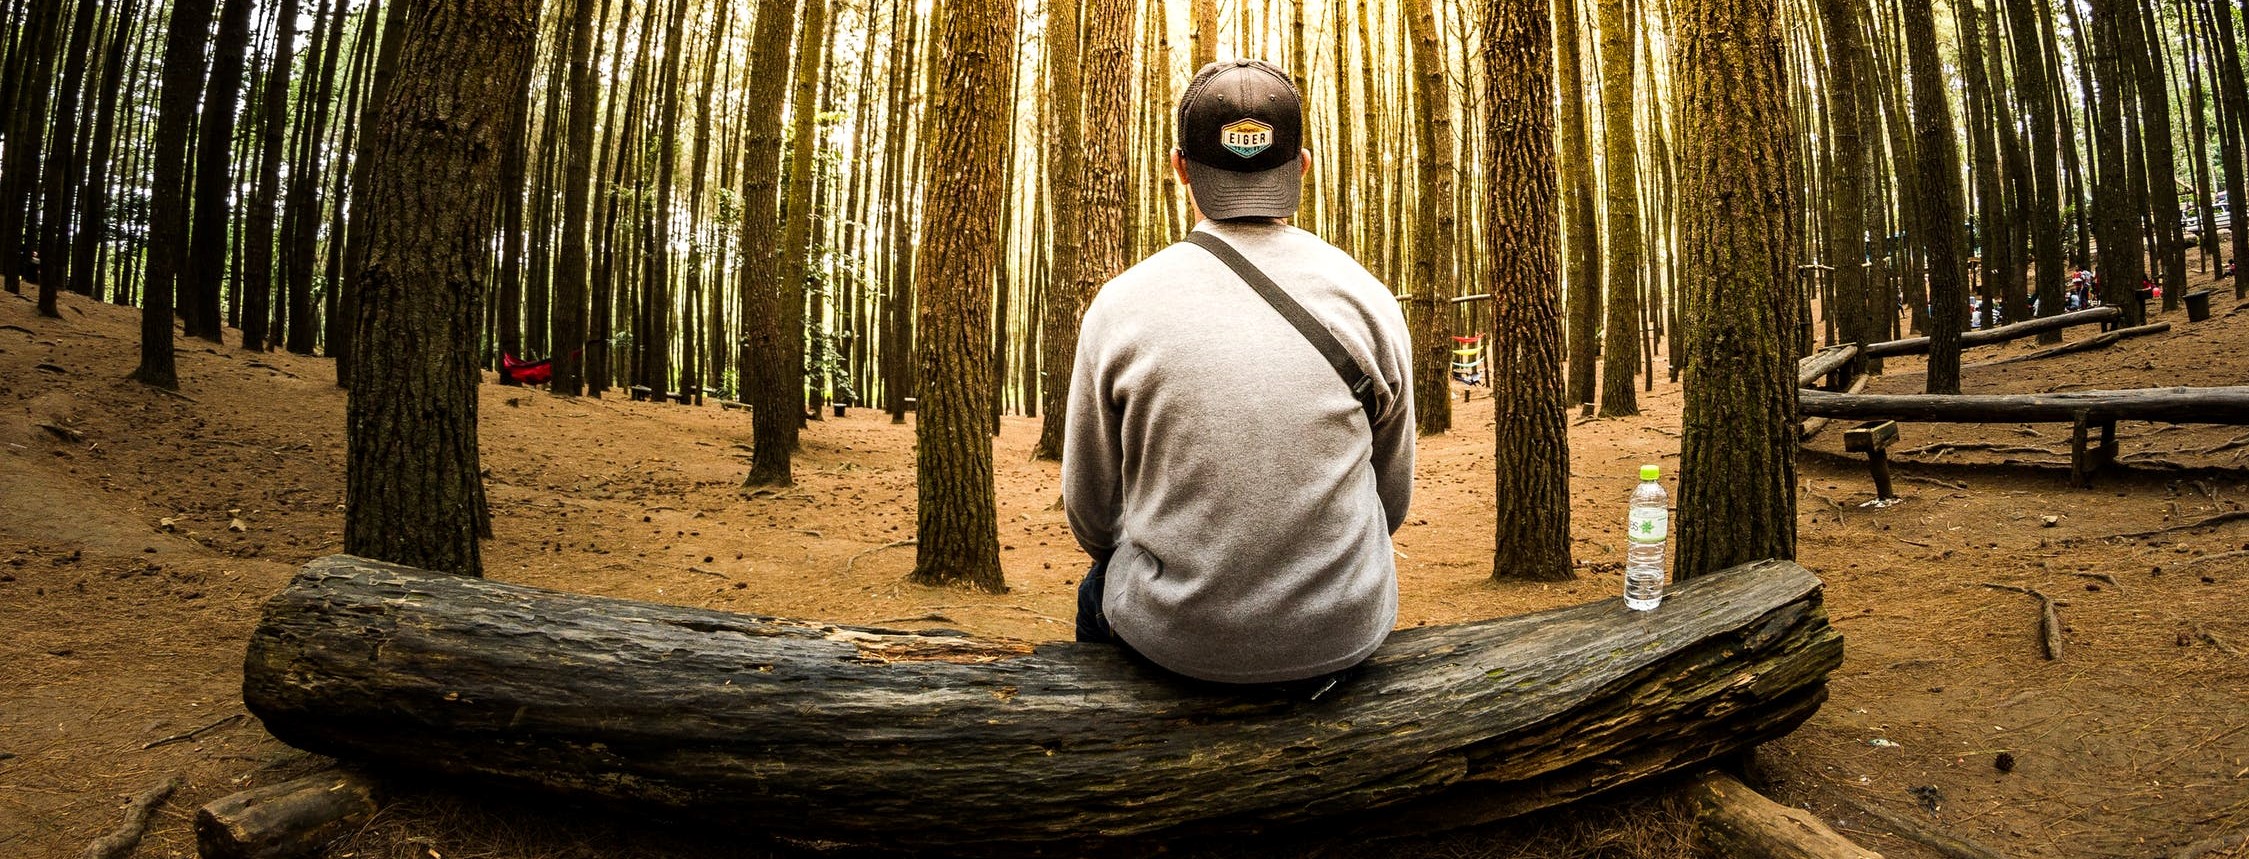 man sitting on log in the forest